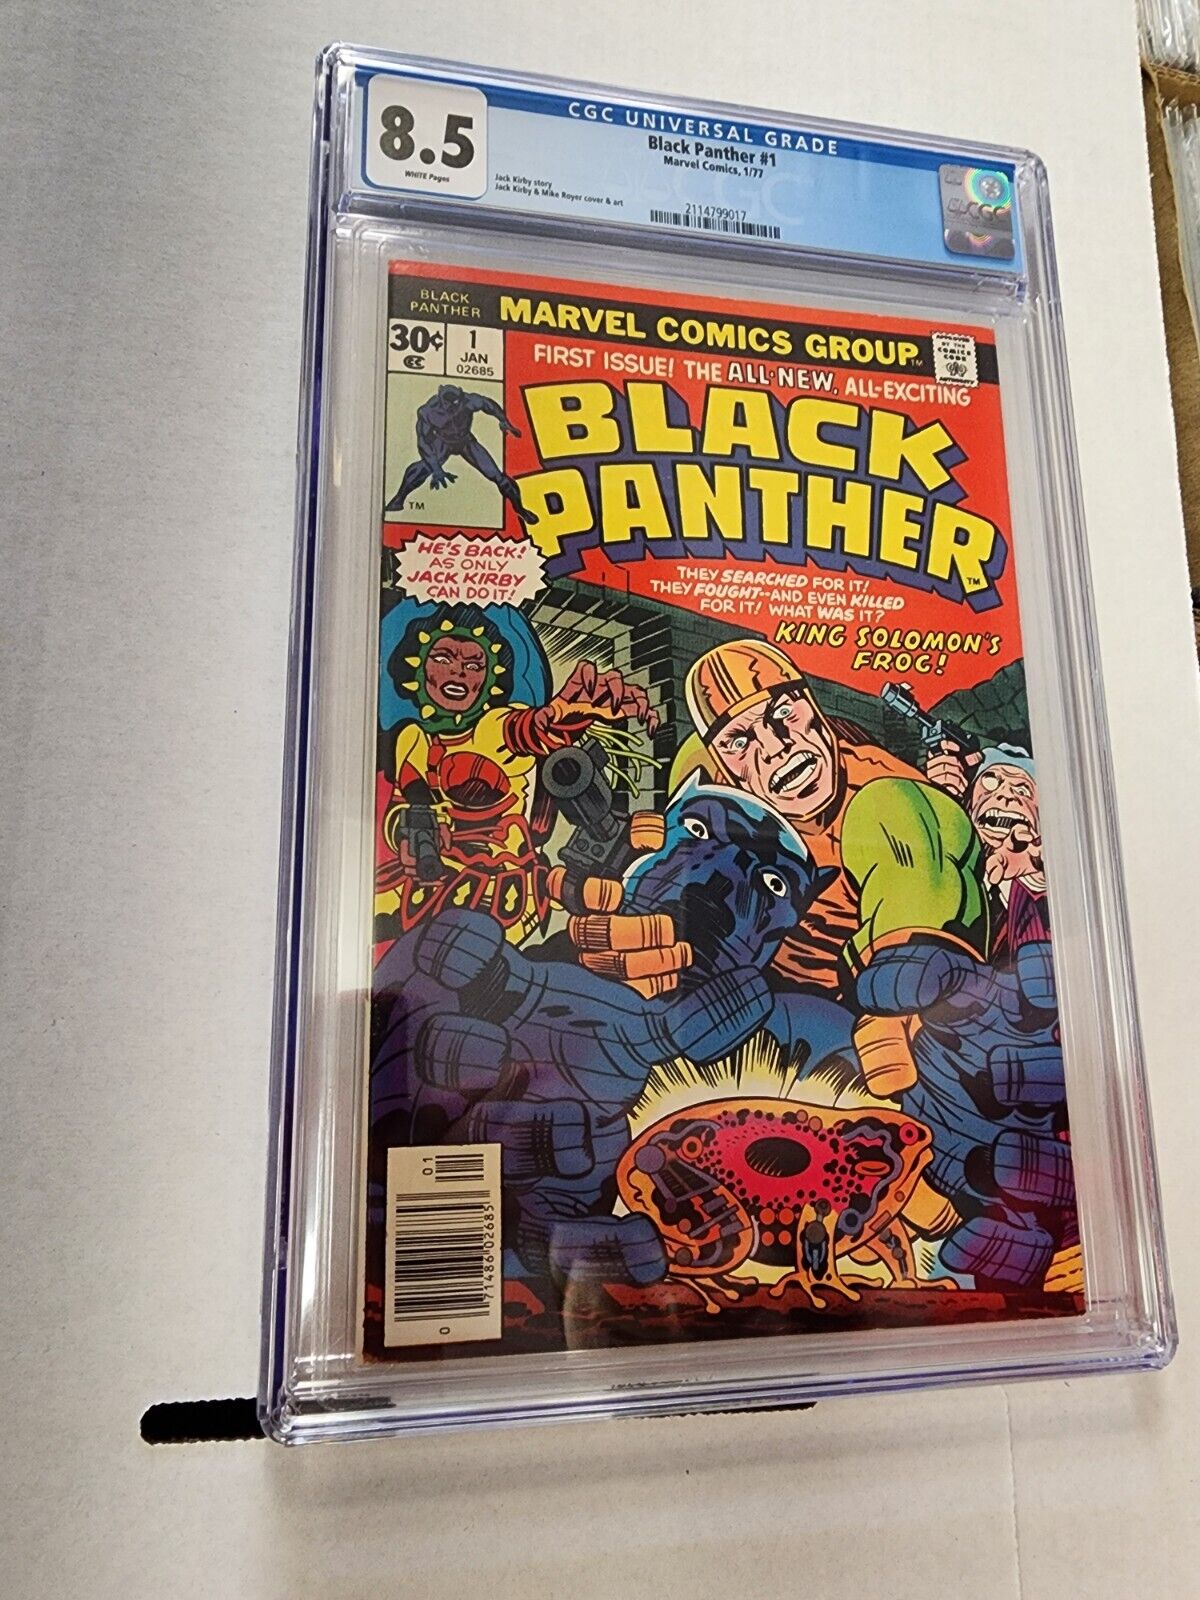 Black Panther #1 (Marvel, January 1977) CGC 8.5 White Pages